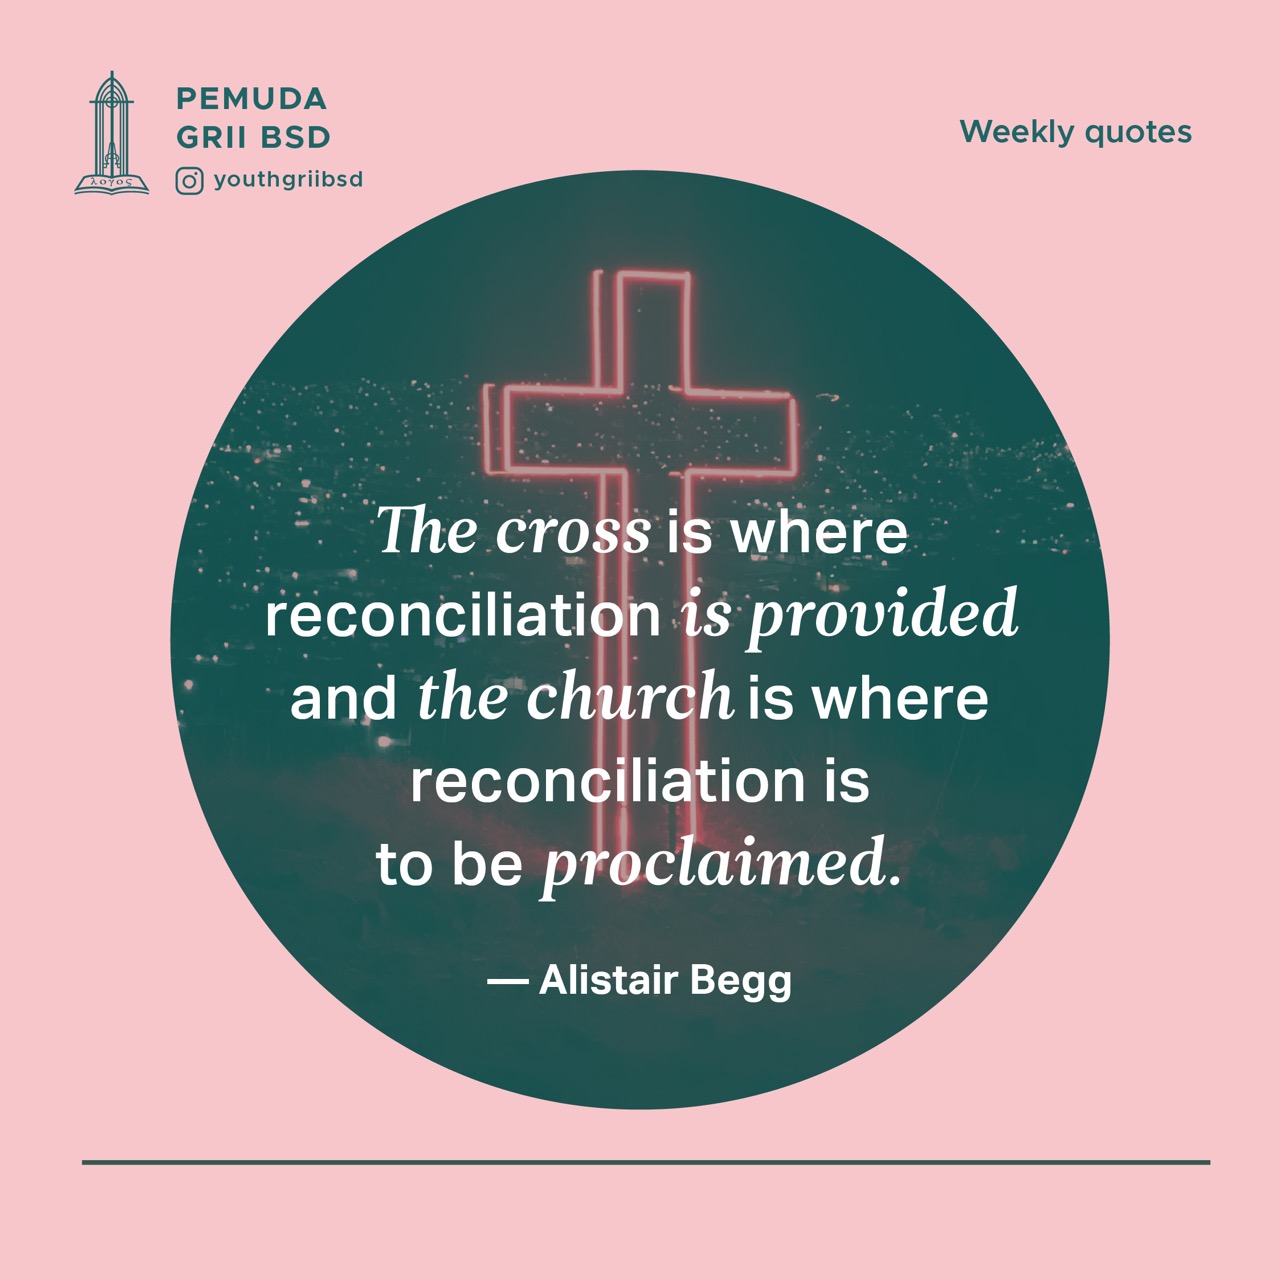 The cross is where reconciliation is provided and the church is where reconciliation is to be proclaimed.